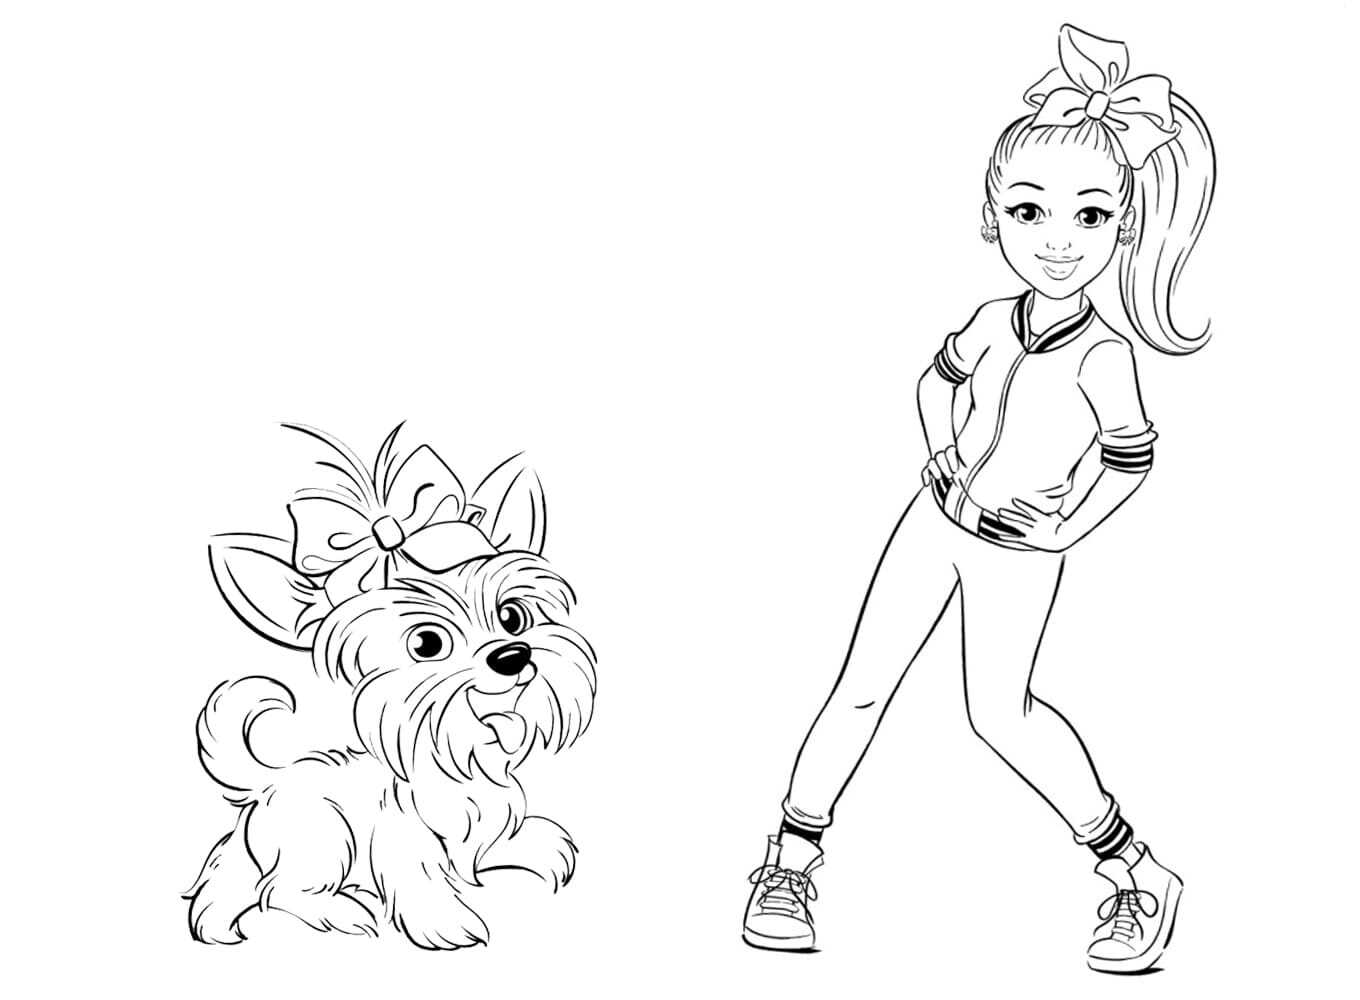 The dog Bow Bow dances with Jojo Siwa Coloring Page